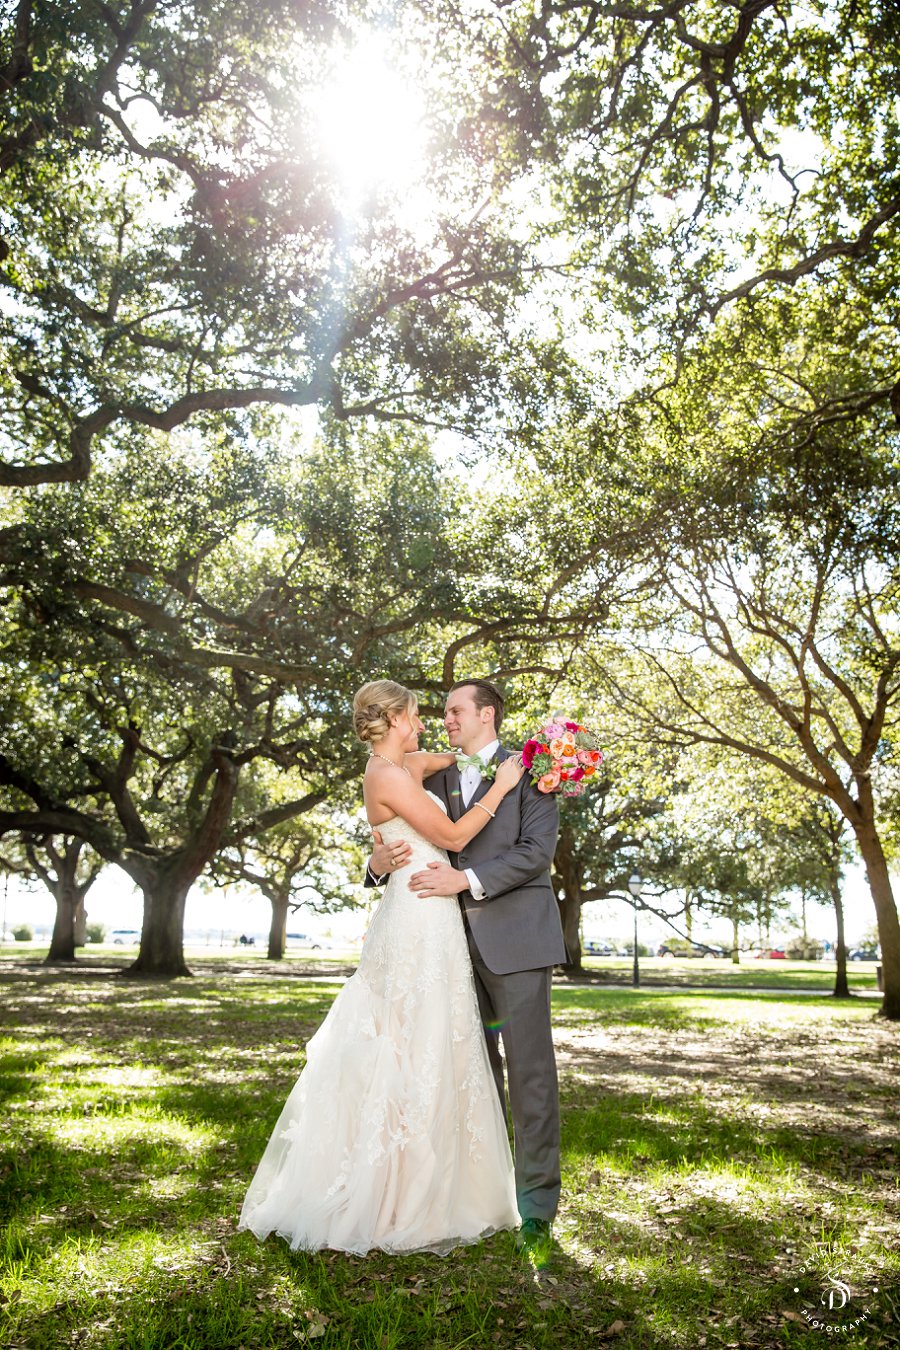 Battery Park Posed Pictures - Charleston Photographer - oak trees